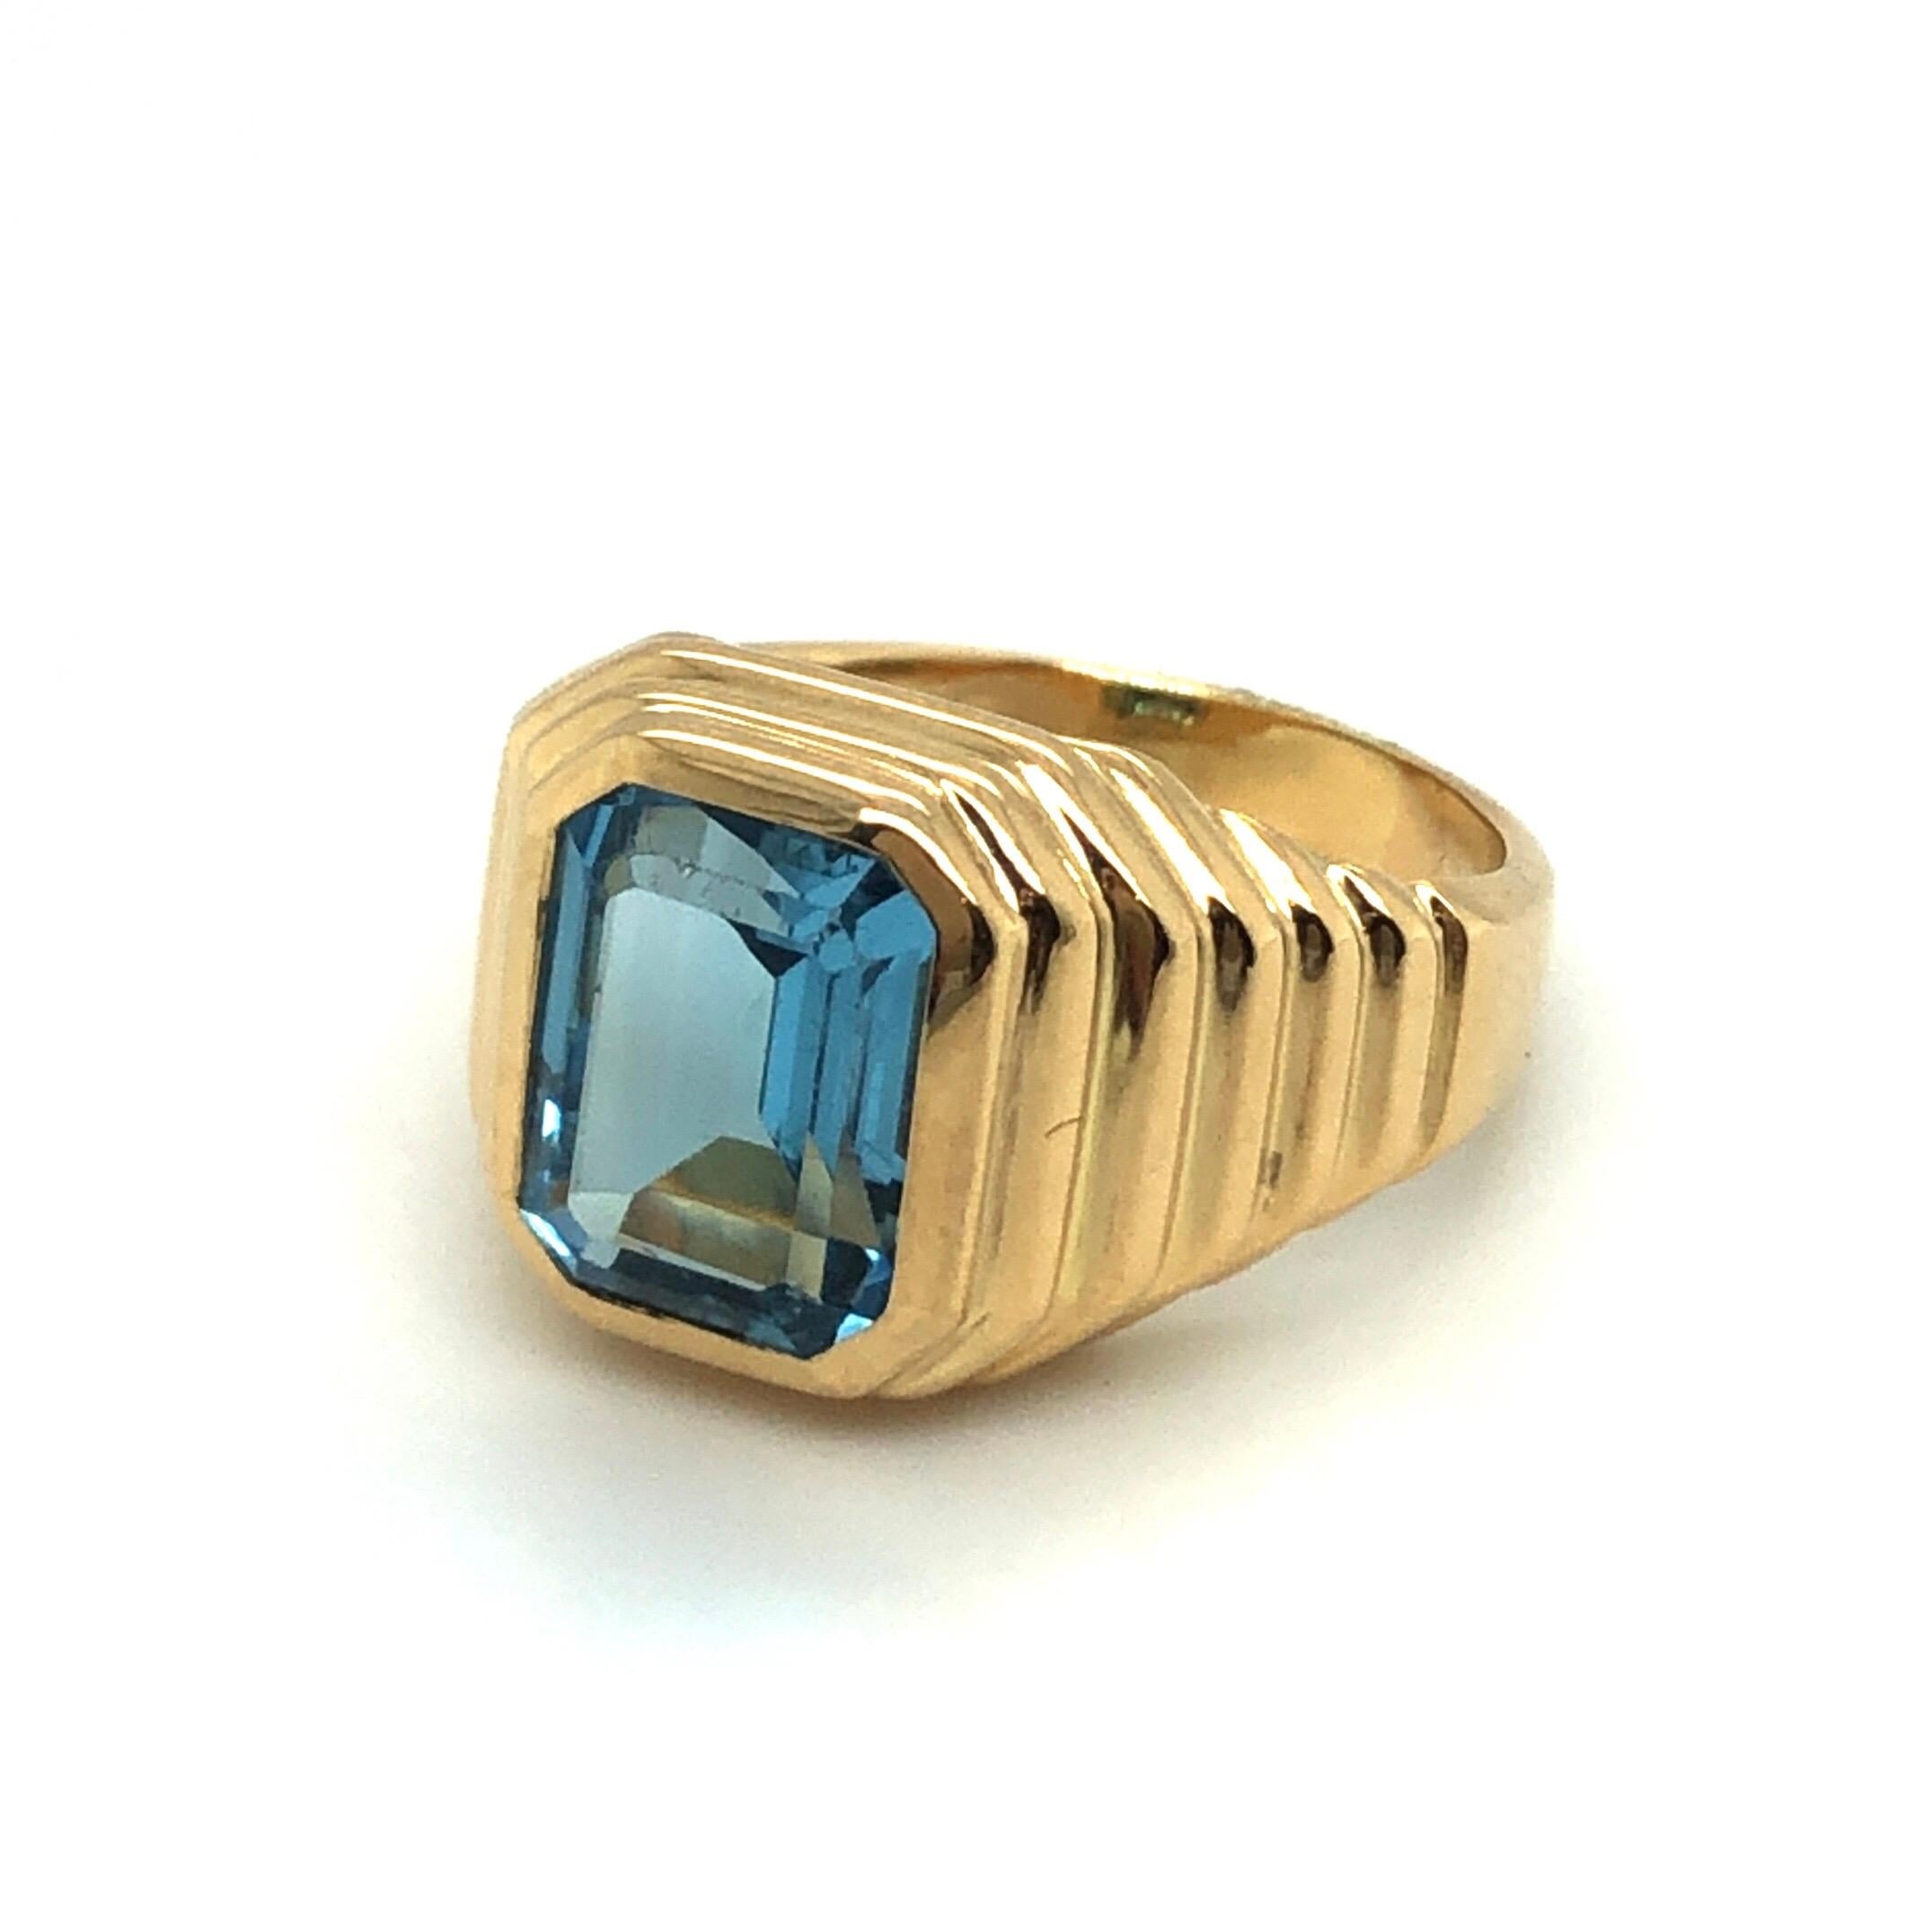 Rare 18 karat yellow gold and blue topaz cocktail ring by renowned Italian brand Bvlgari, 1990s.
Crafted in 18 karat yellow gold, the ring head designed as a step pyramid culminating in a luminous octagonal blue topaz of circa 3.6 carats.
This jewel